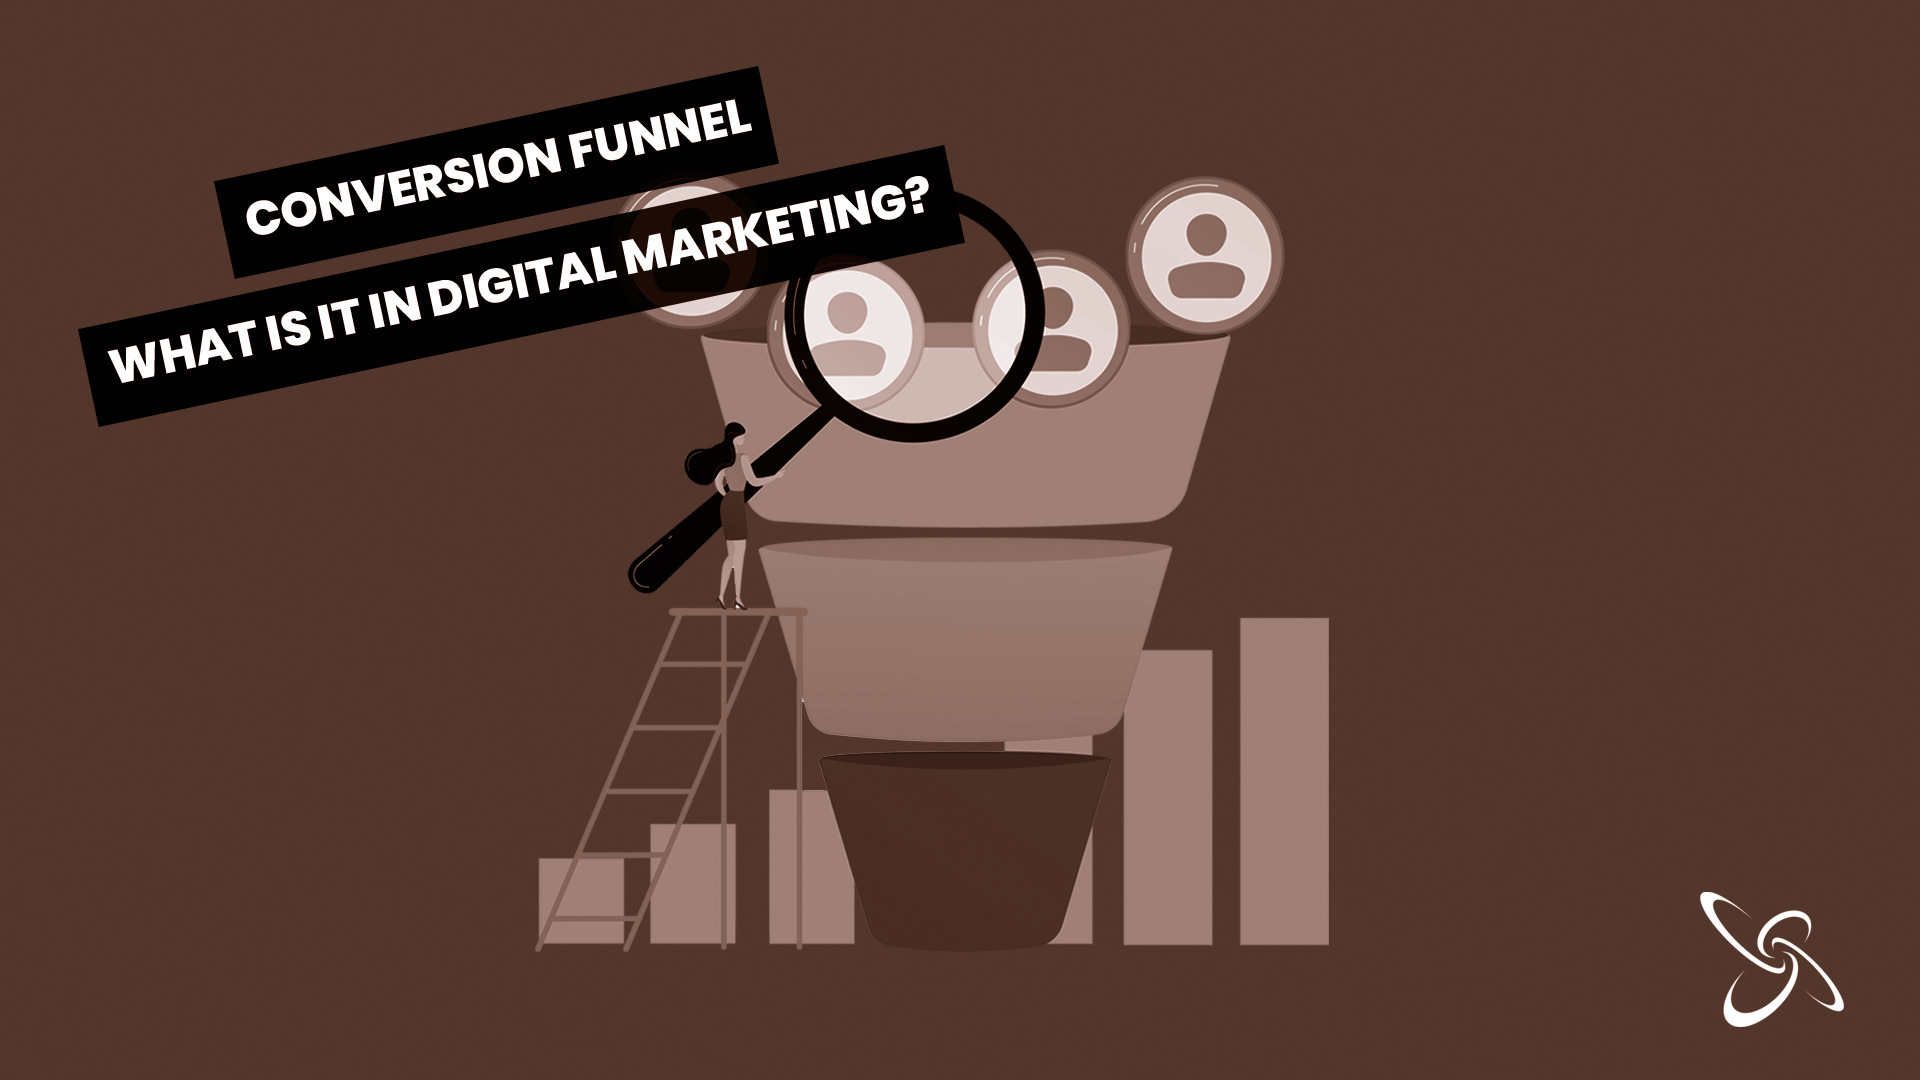 conversion funnel: what is it in digital marketing?